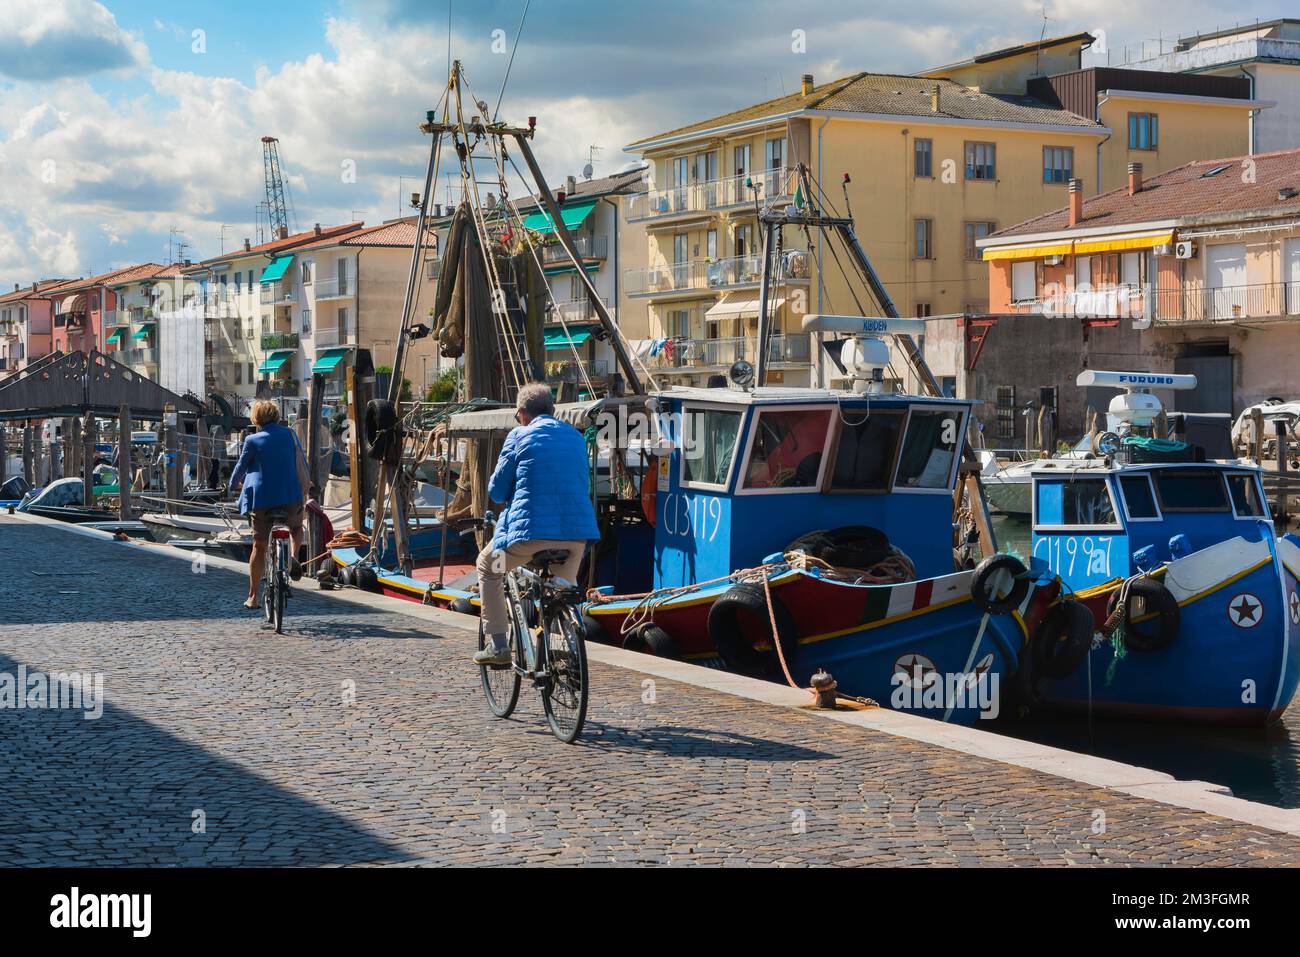 Senior couple cycling, rear view of two senior cyclists riding their bikes along a quay in an Italian fishing port, Chioggia, Veneto, Italy Stock Photo